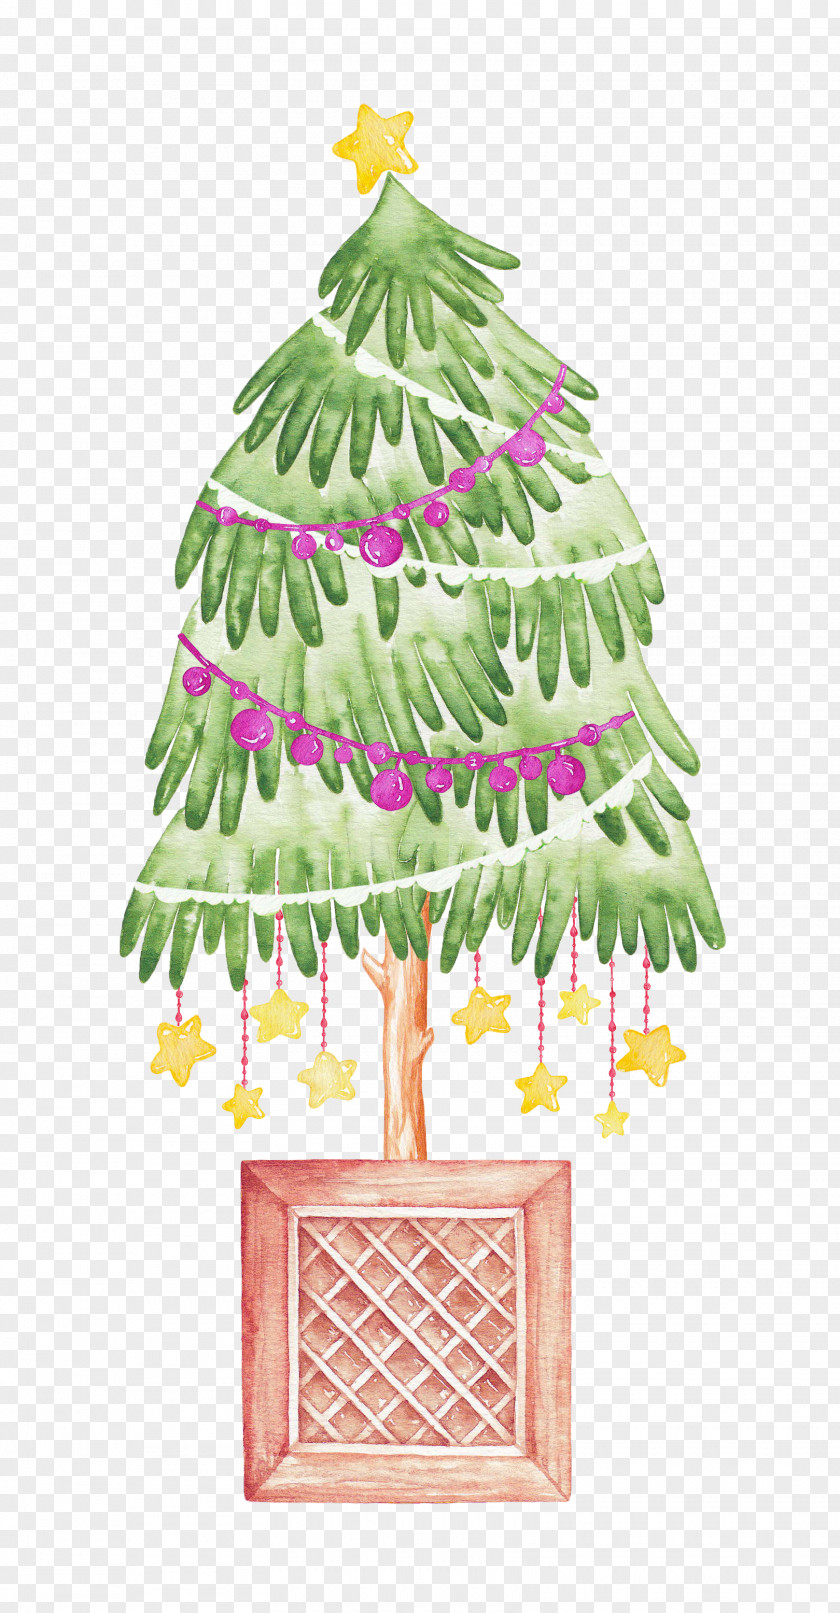 Christmas Tree IPhone X Watercolor Painting Illustration PNG